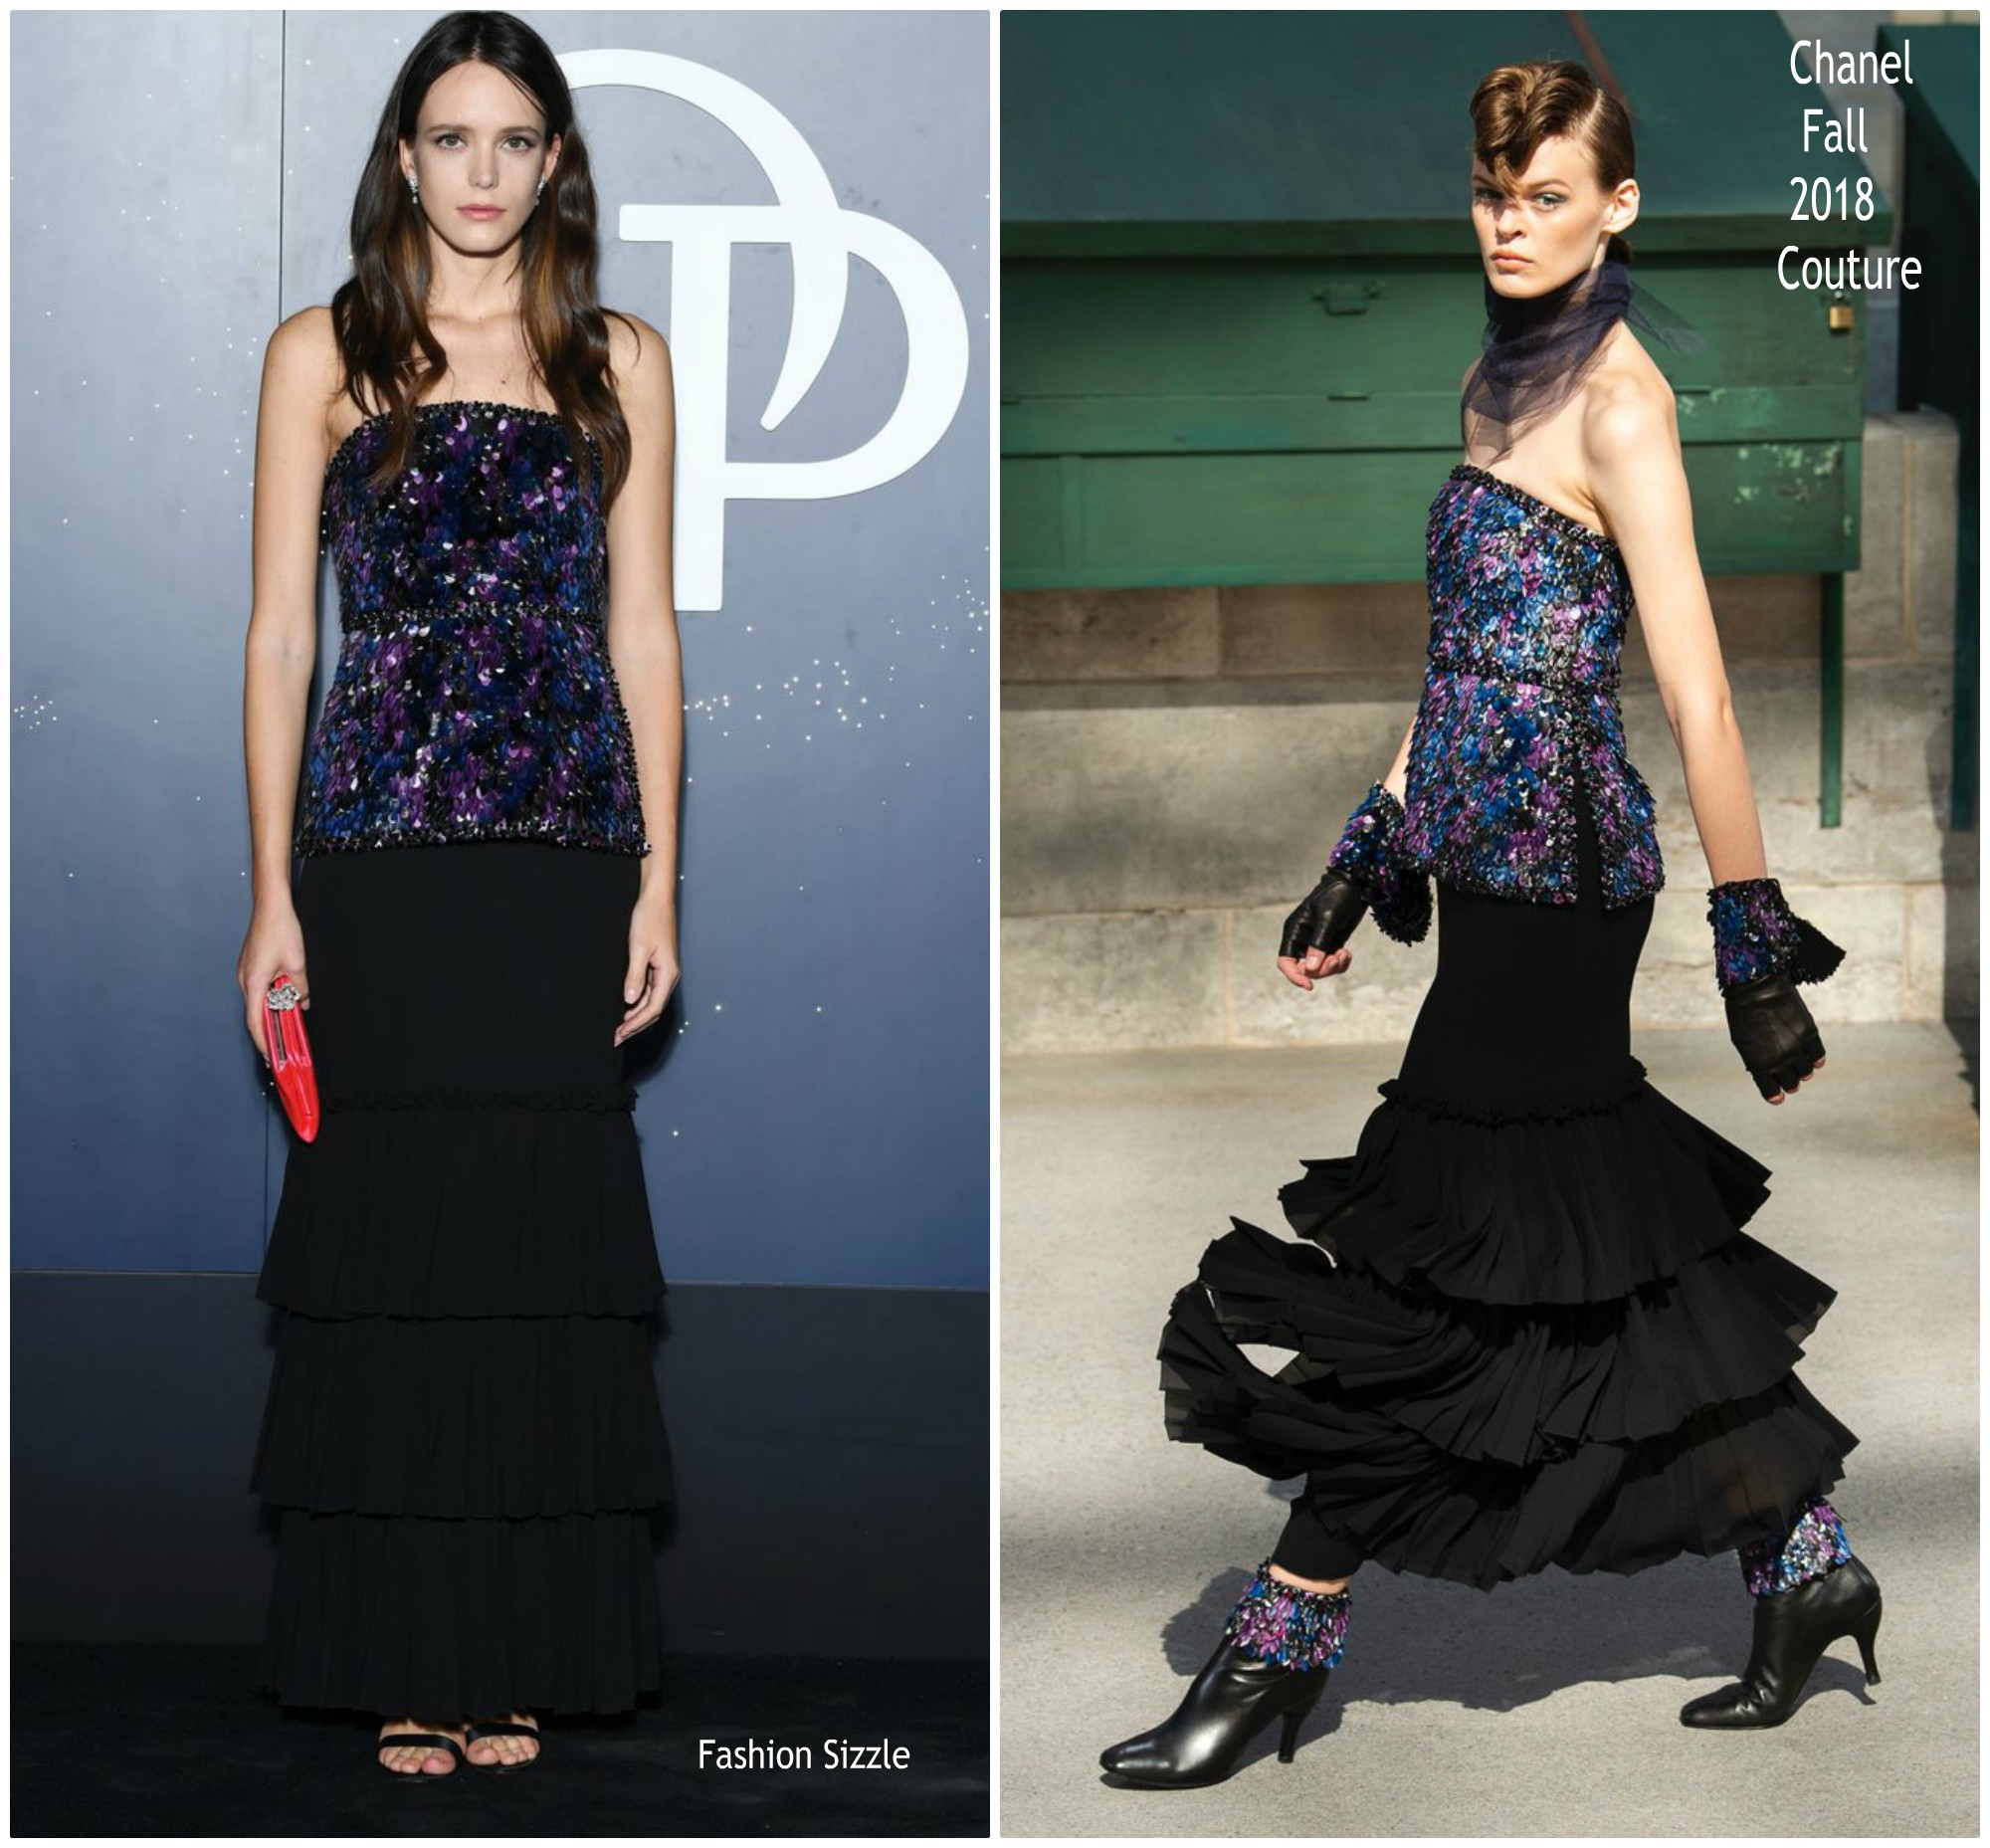 stacy-martin-in-chanel-couture-opening-gala-opera-ballet-season-in-paris